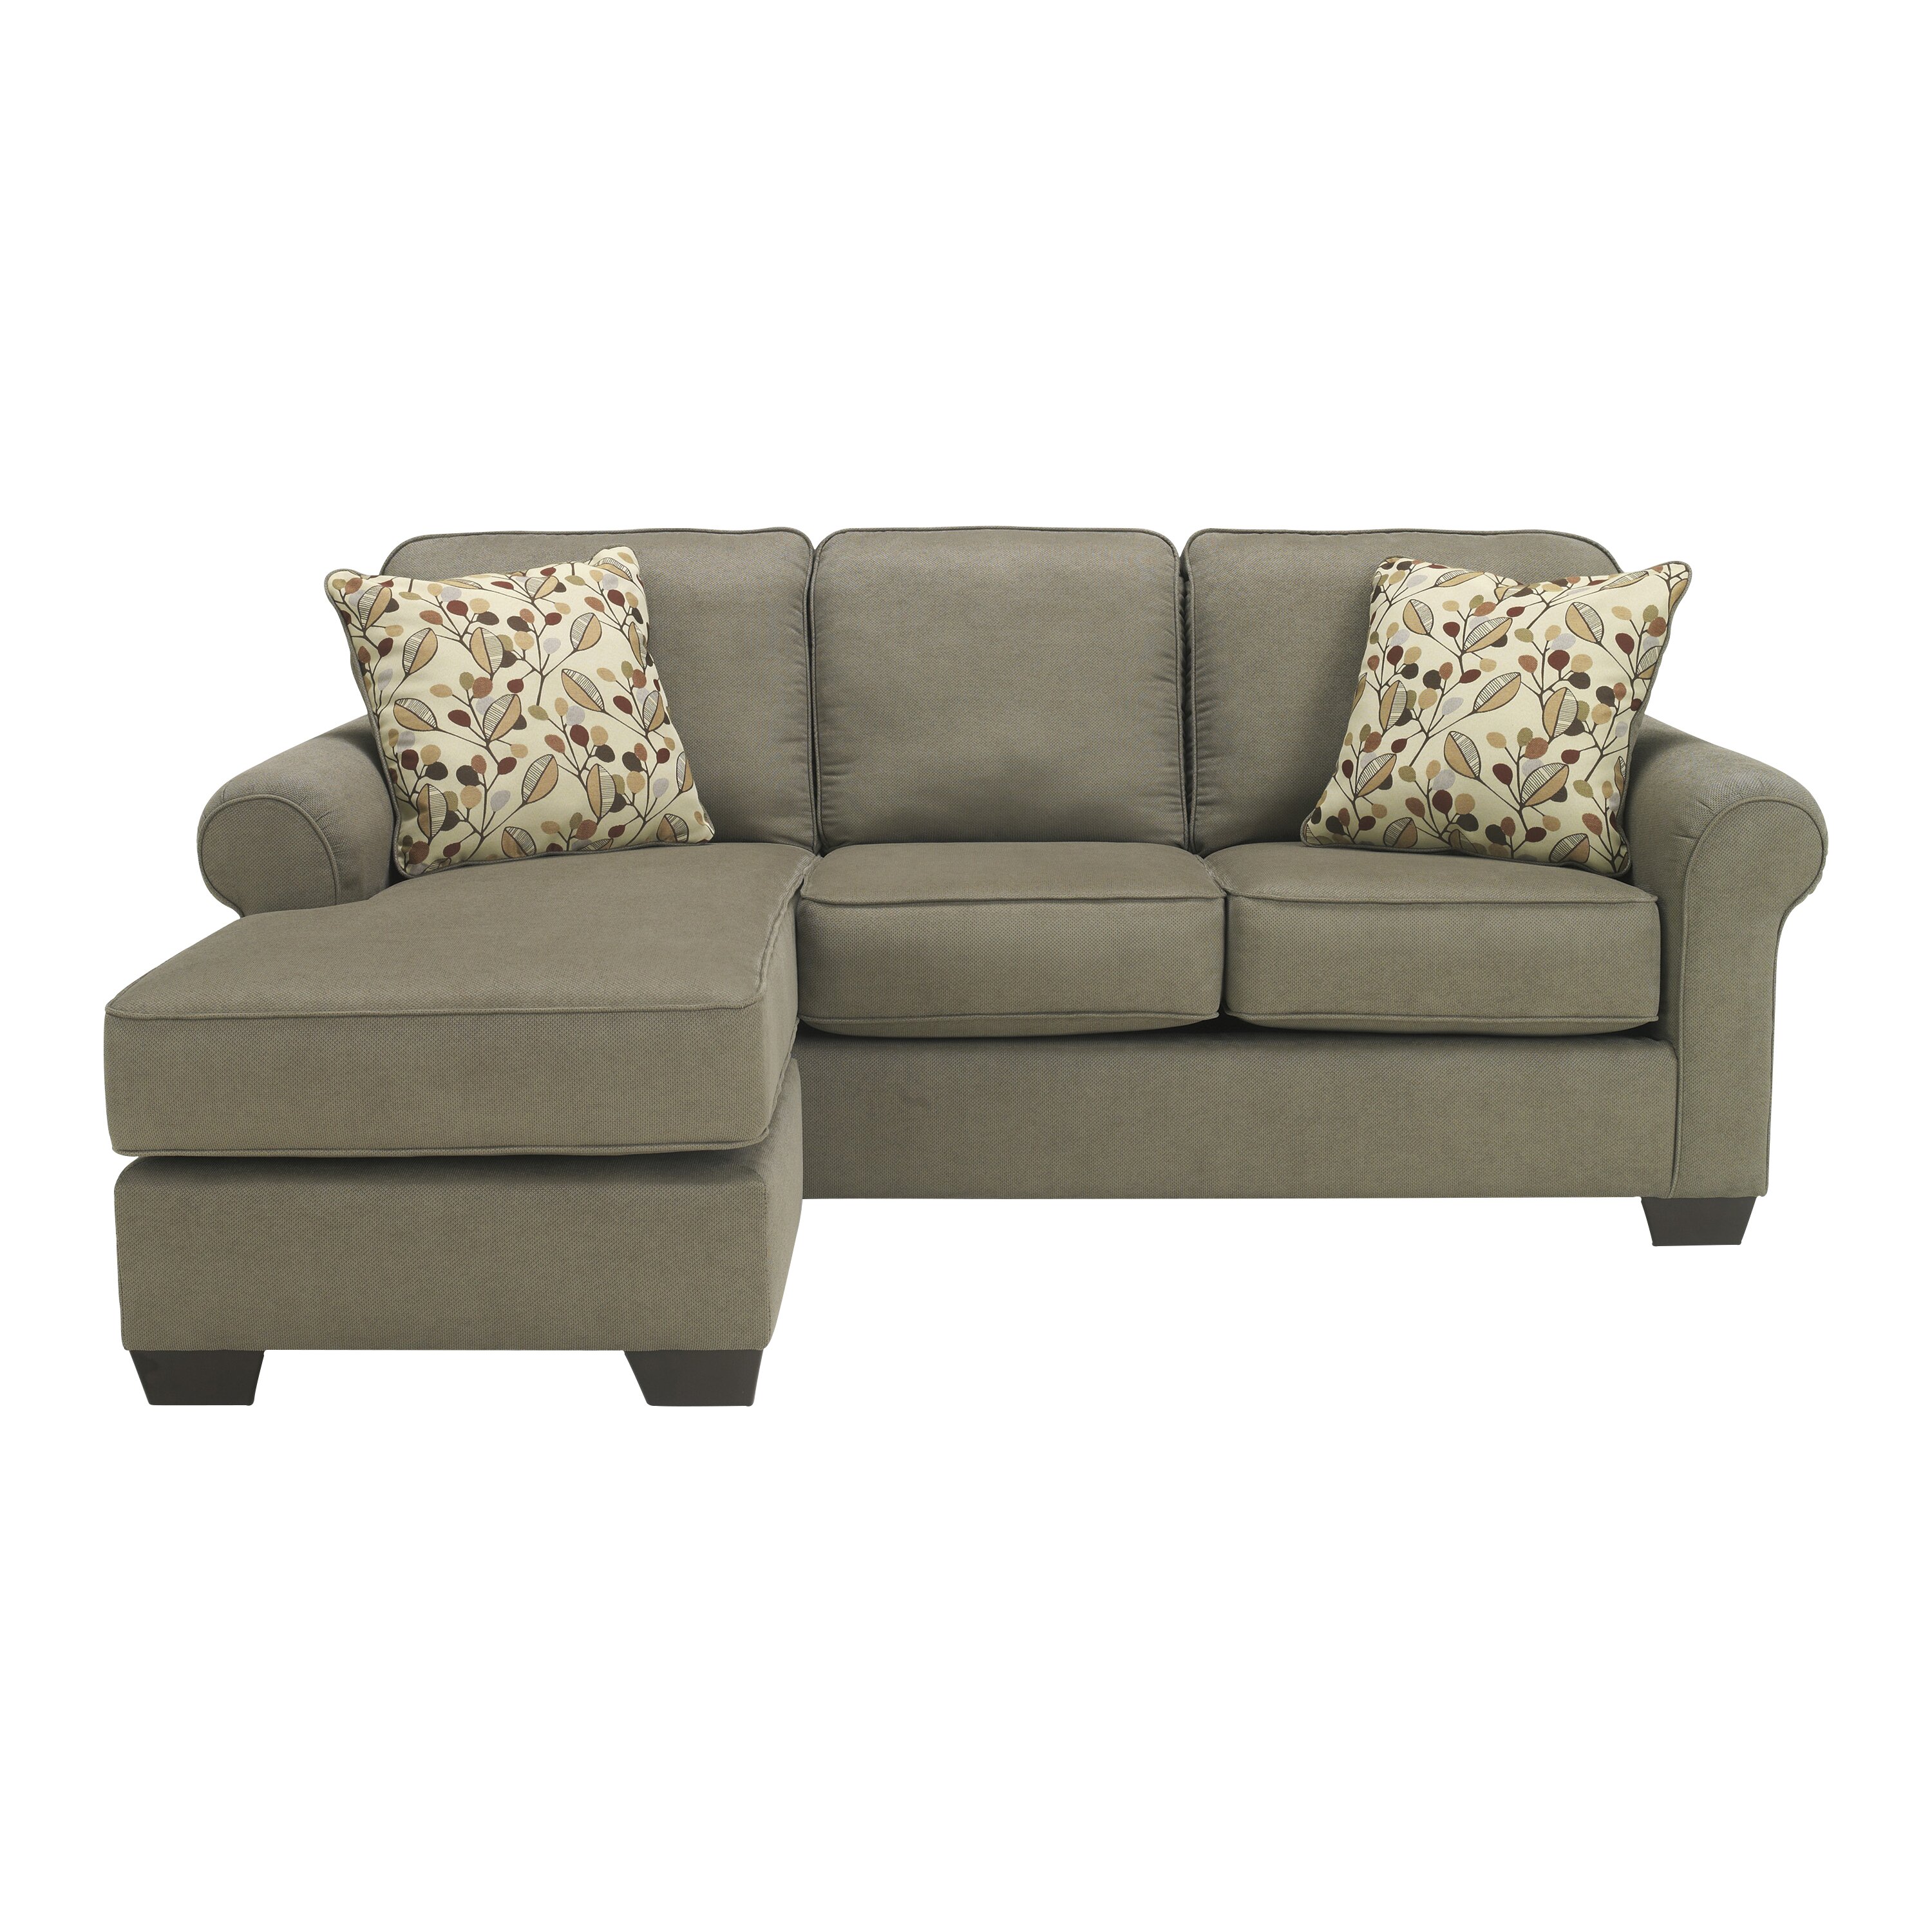 Benchcraft Danely Chaise Sofa & Reviews Wayfair